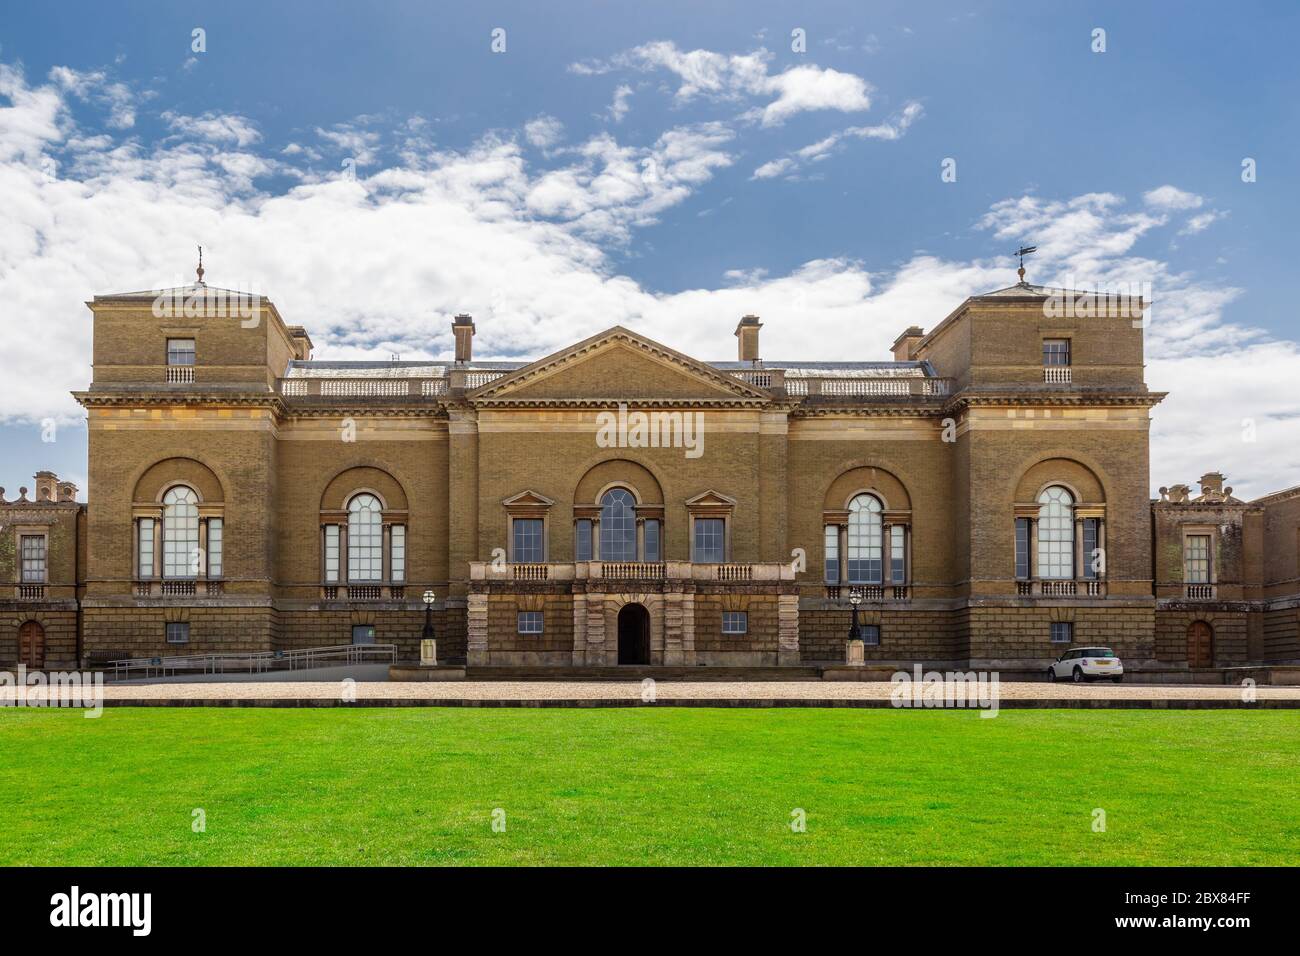 Holkham, Norfolk, England, April 23, 2019: Holkham Hall an 18th-century country house. Stock Photo